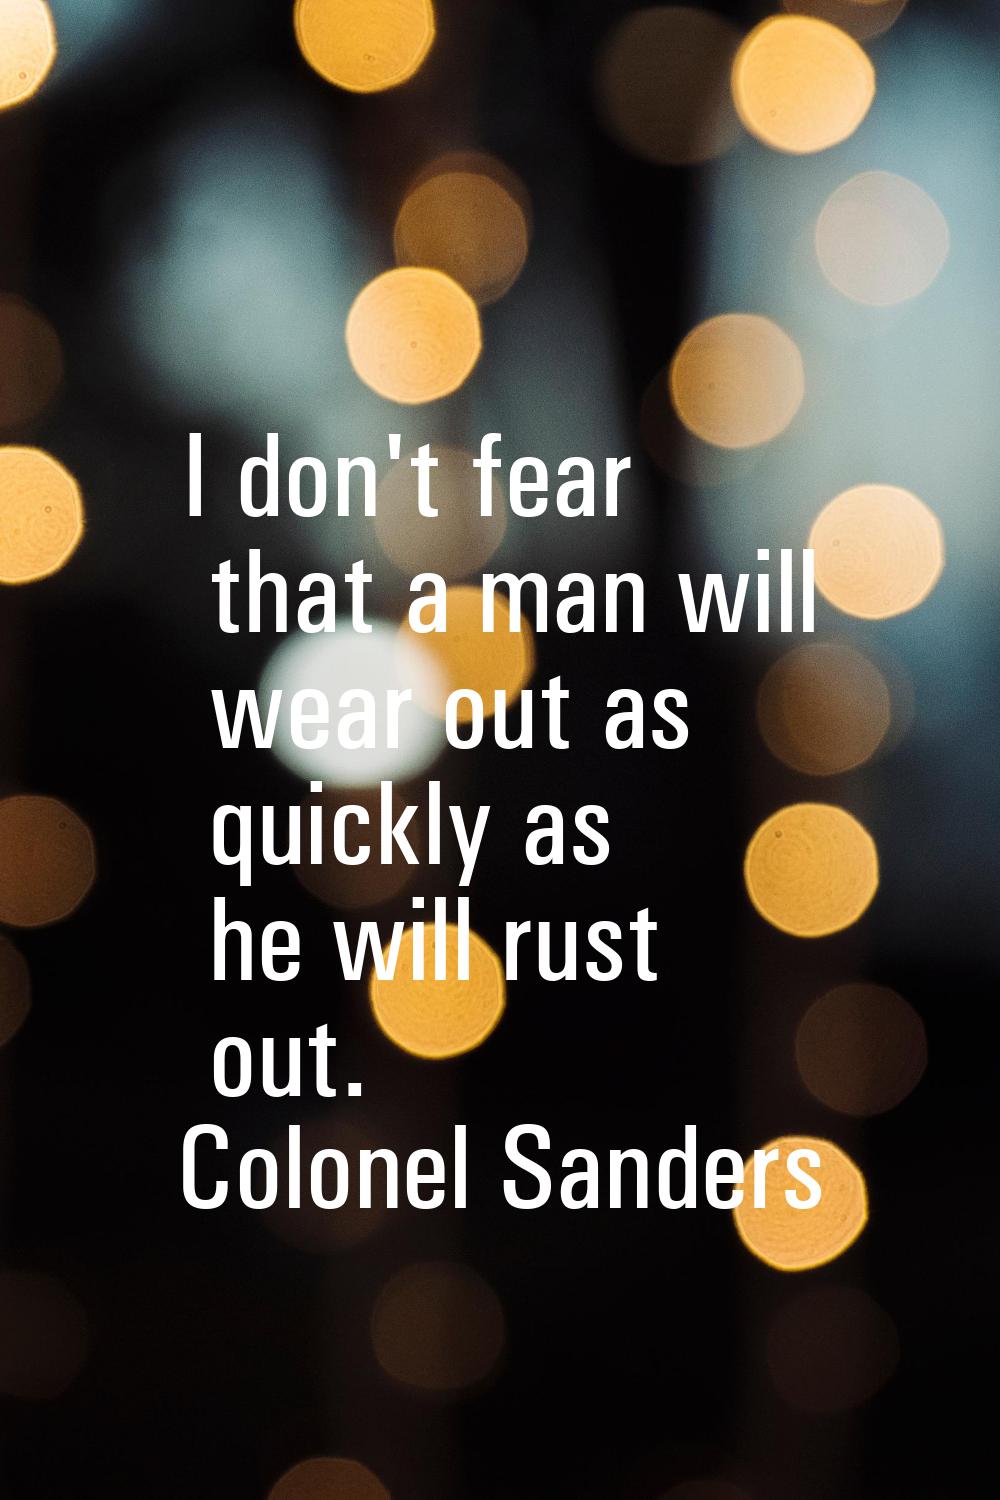 I don't fear that a man will wear out as quickly as he will rust out.